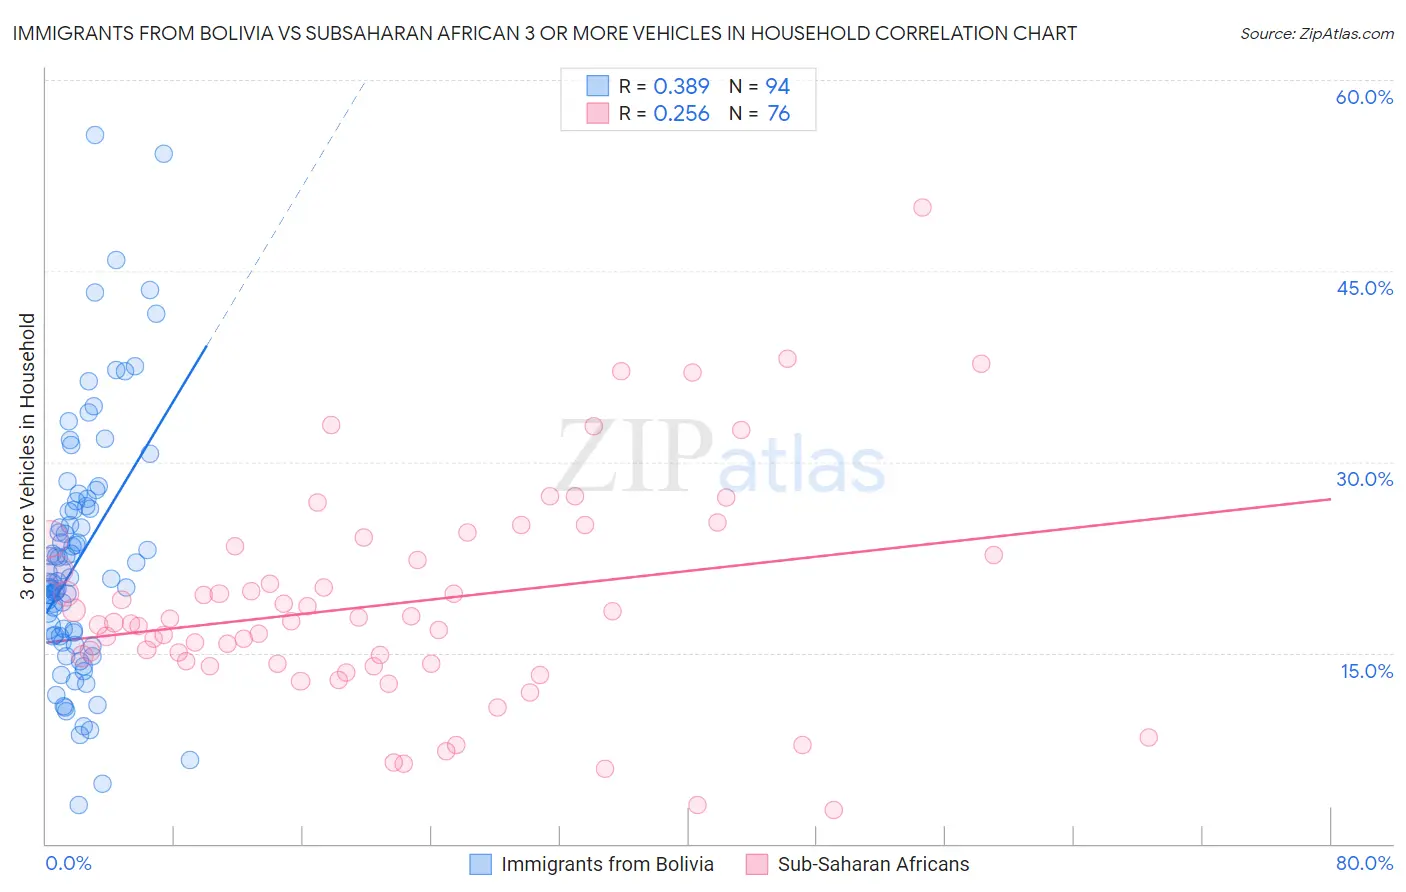 Immigrants from Bolivia vs Subsaharan African 3 or more Vehicles in Household